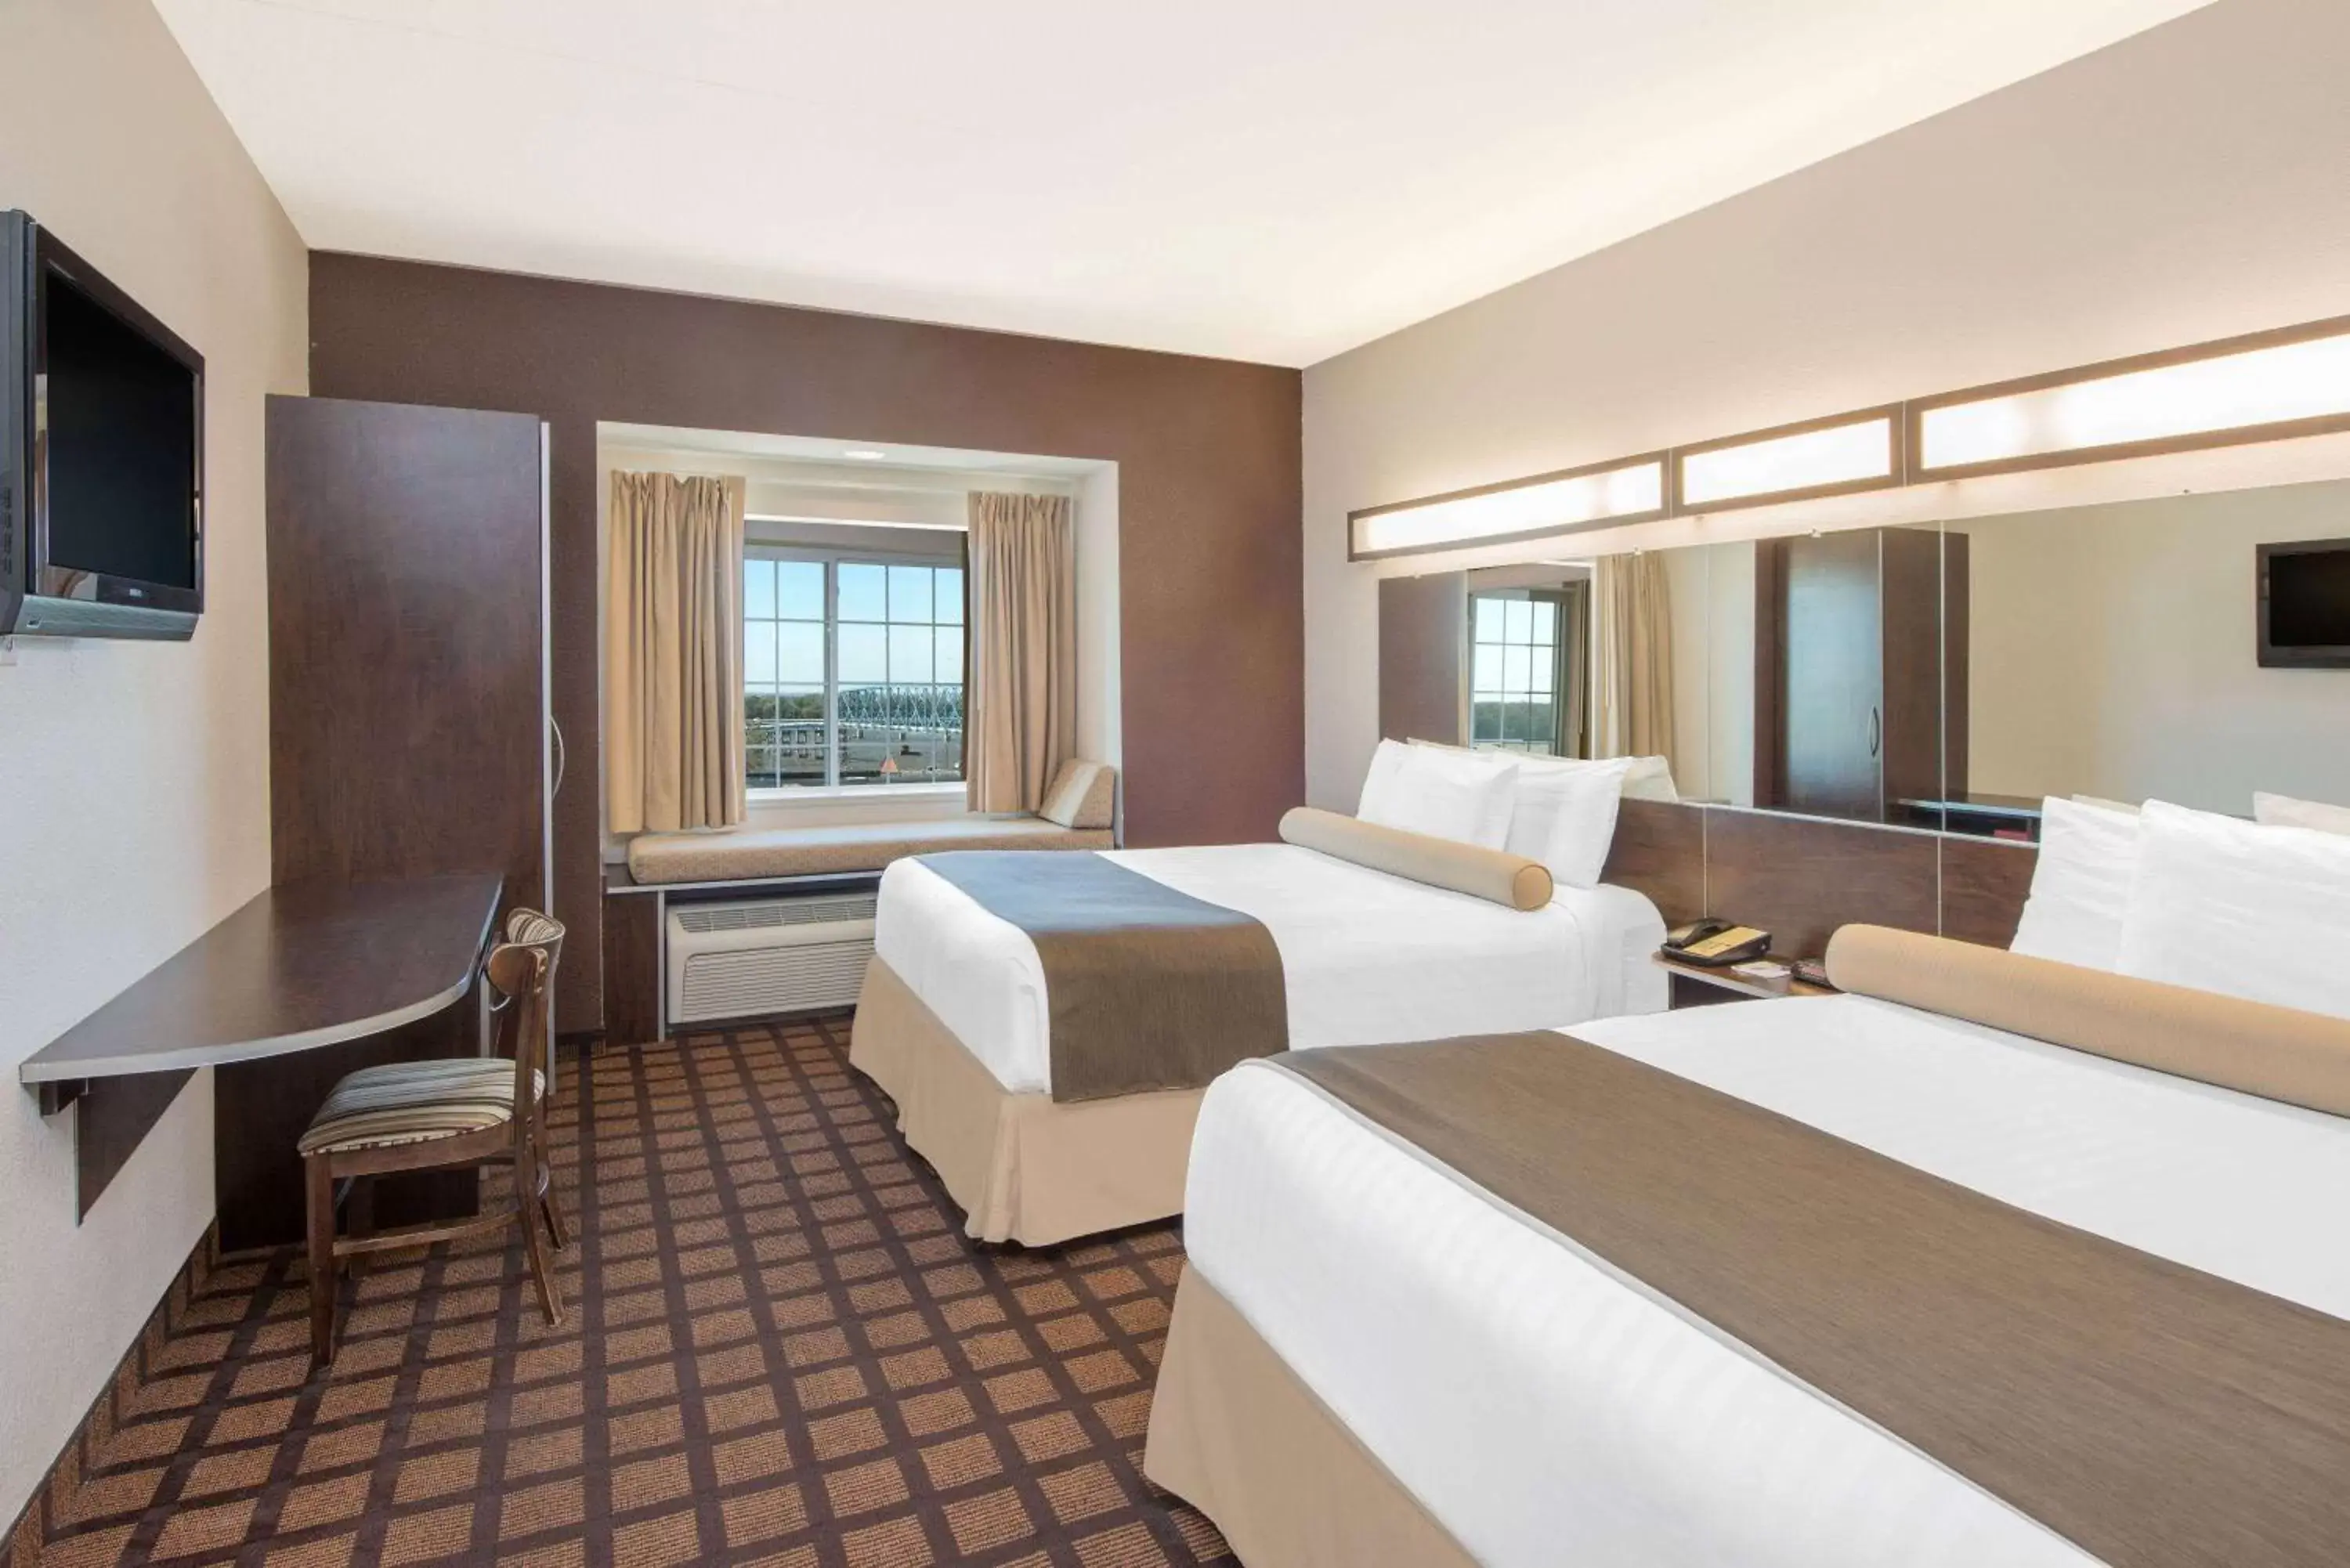 TV and multimedia in Microtel Inn & Suites Quincy by Wyndham